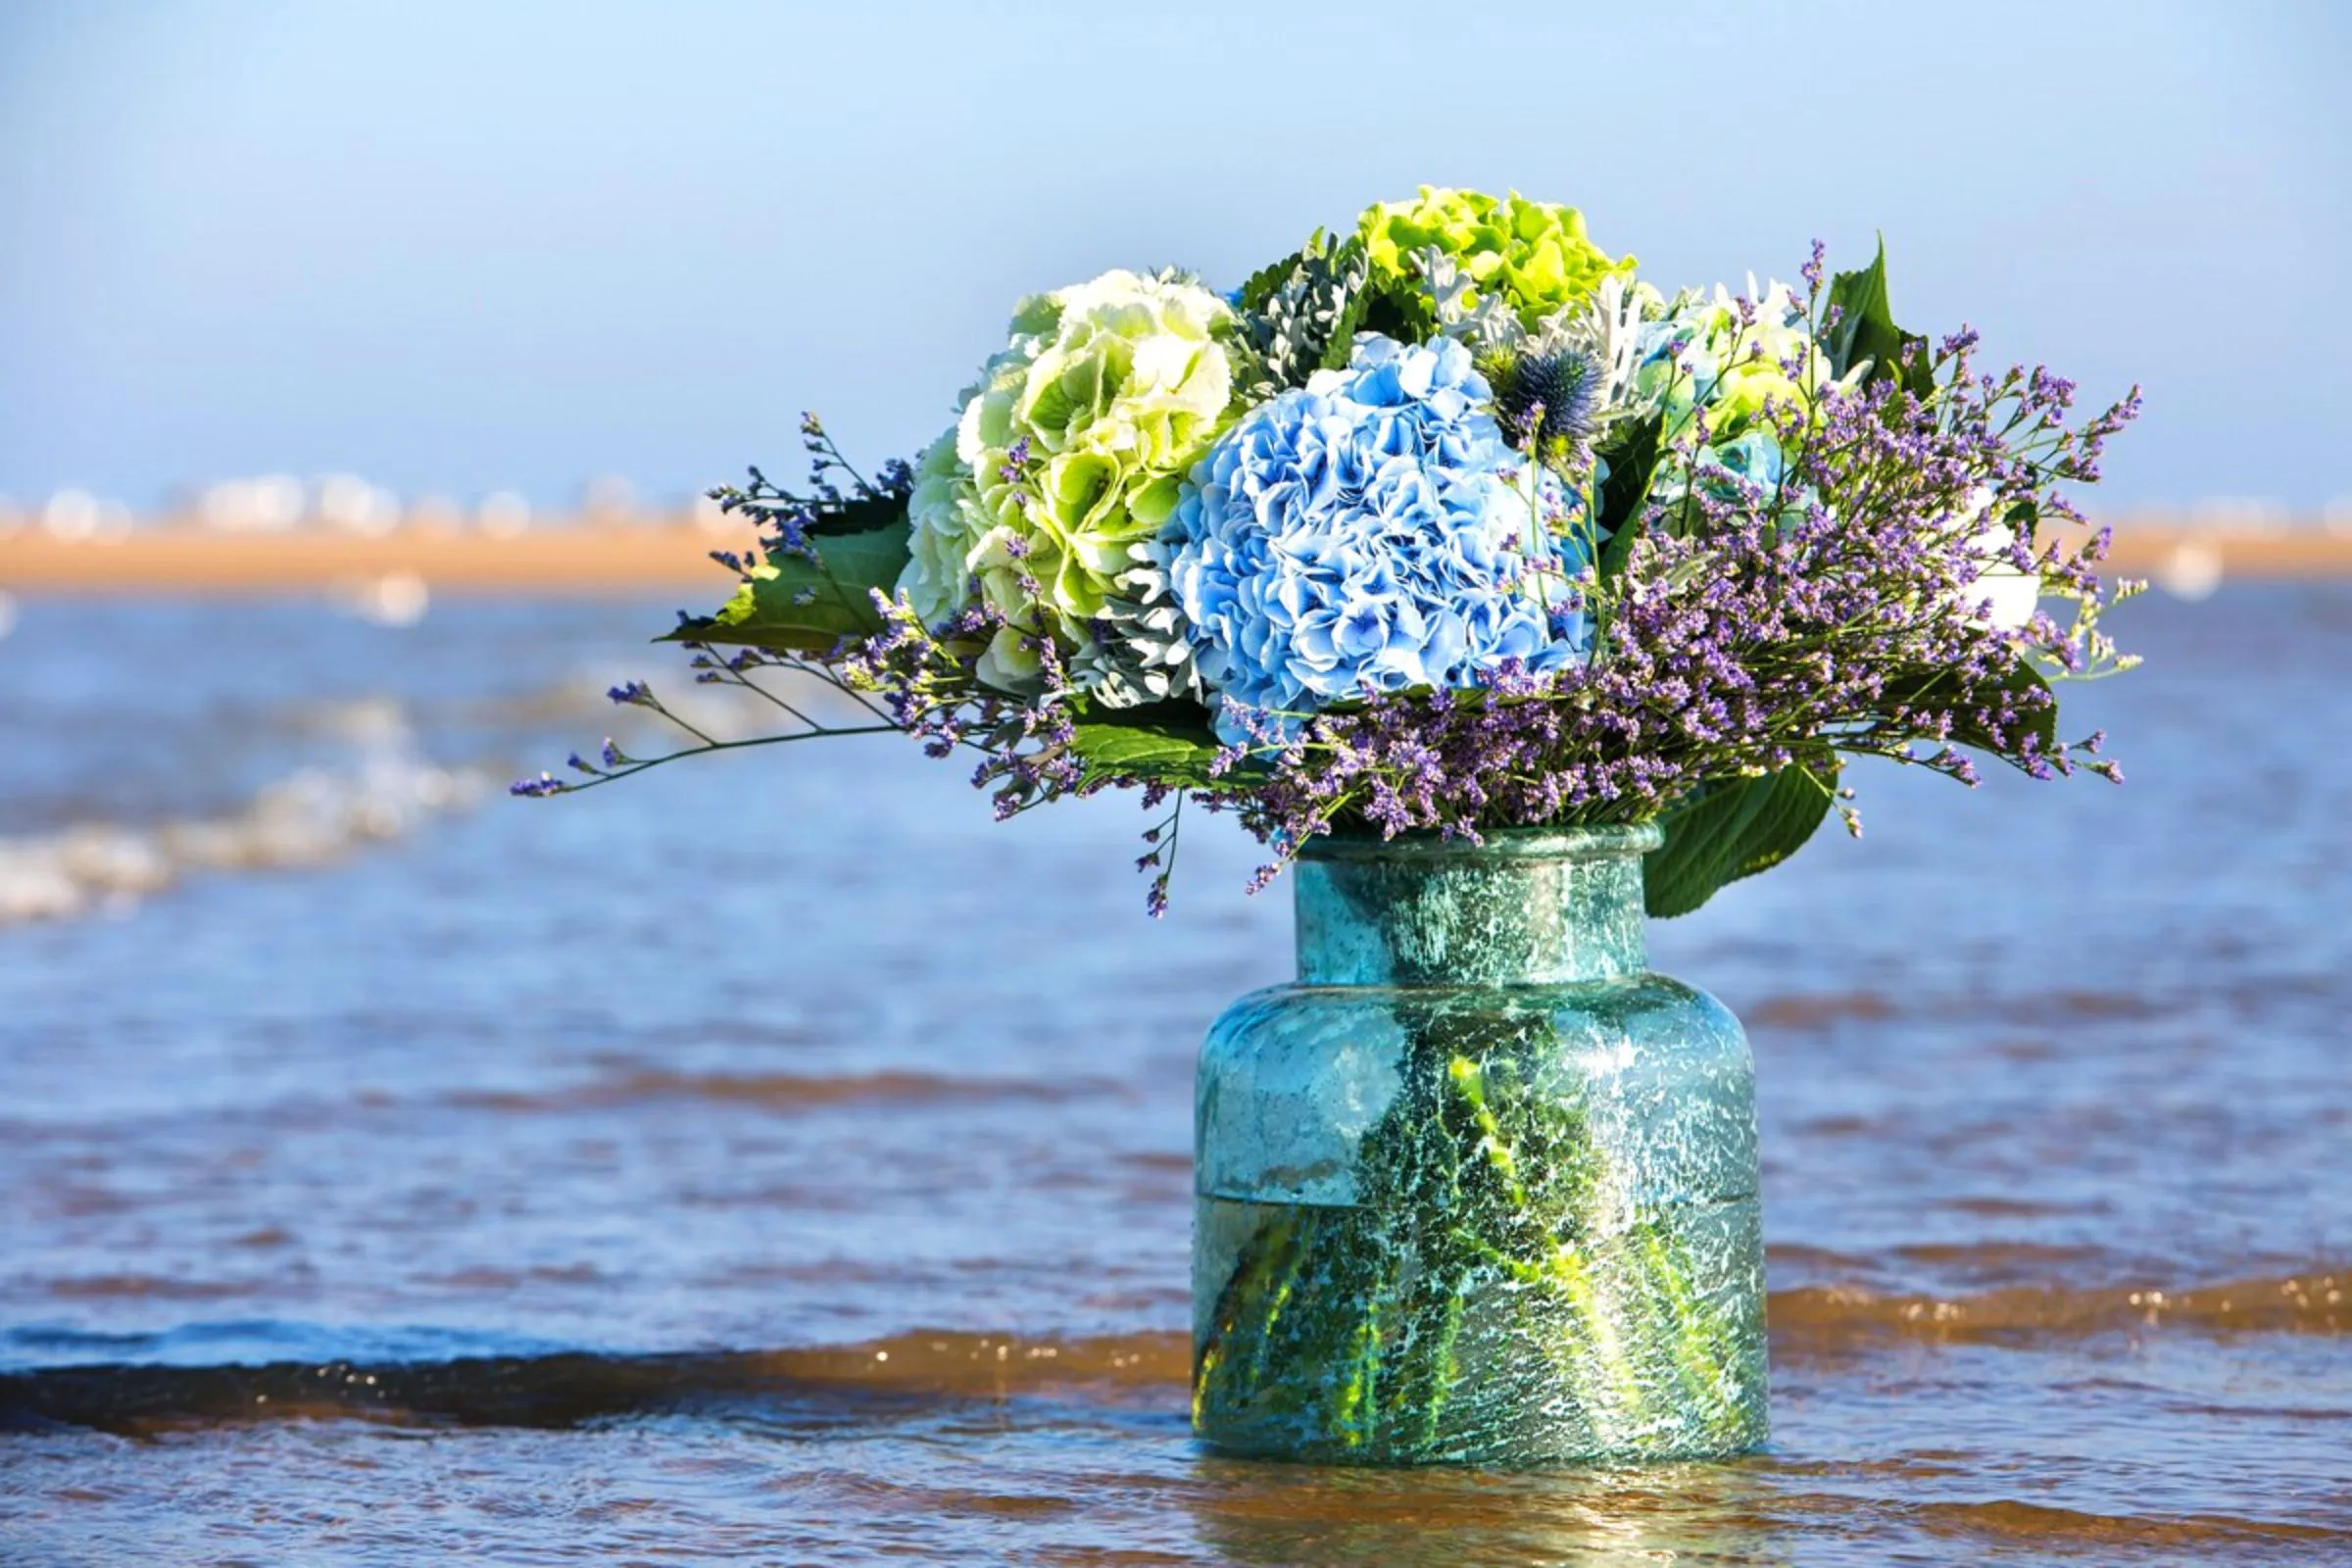 View of a vase with hydrangeas